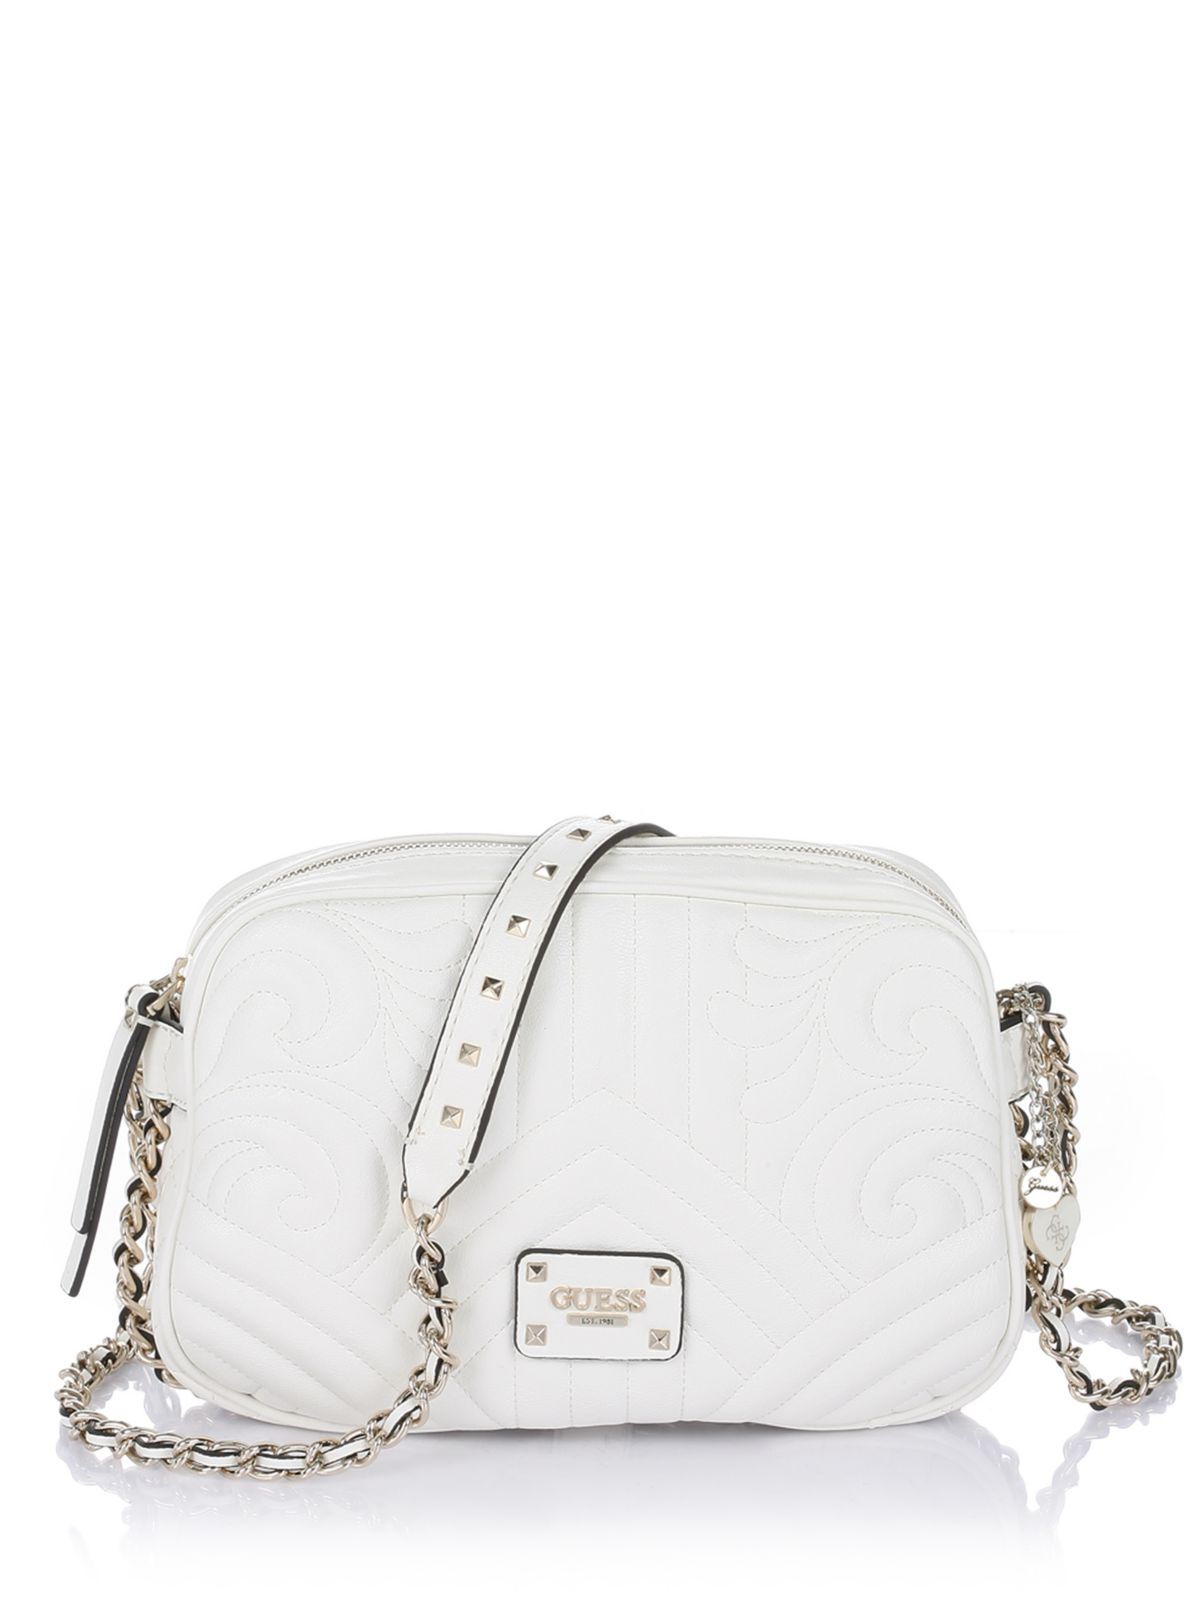 Guess Quilting Rose Crossbody Top Zip Bag in White (cream) | Lyst